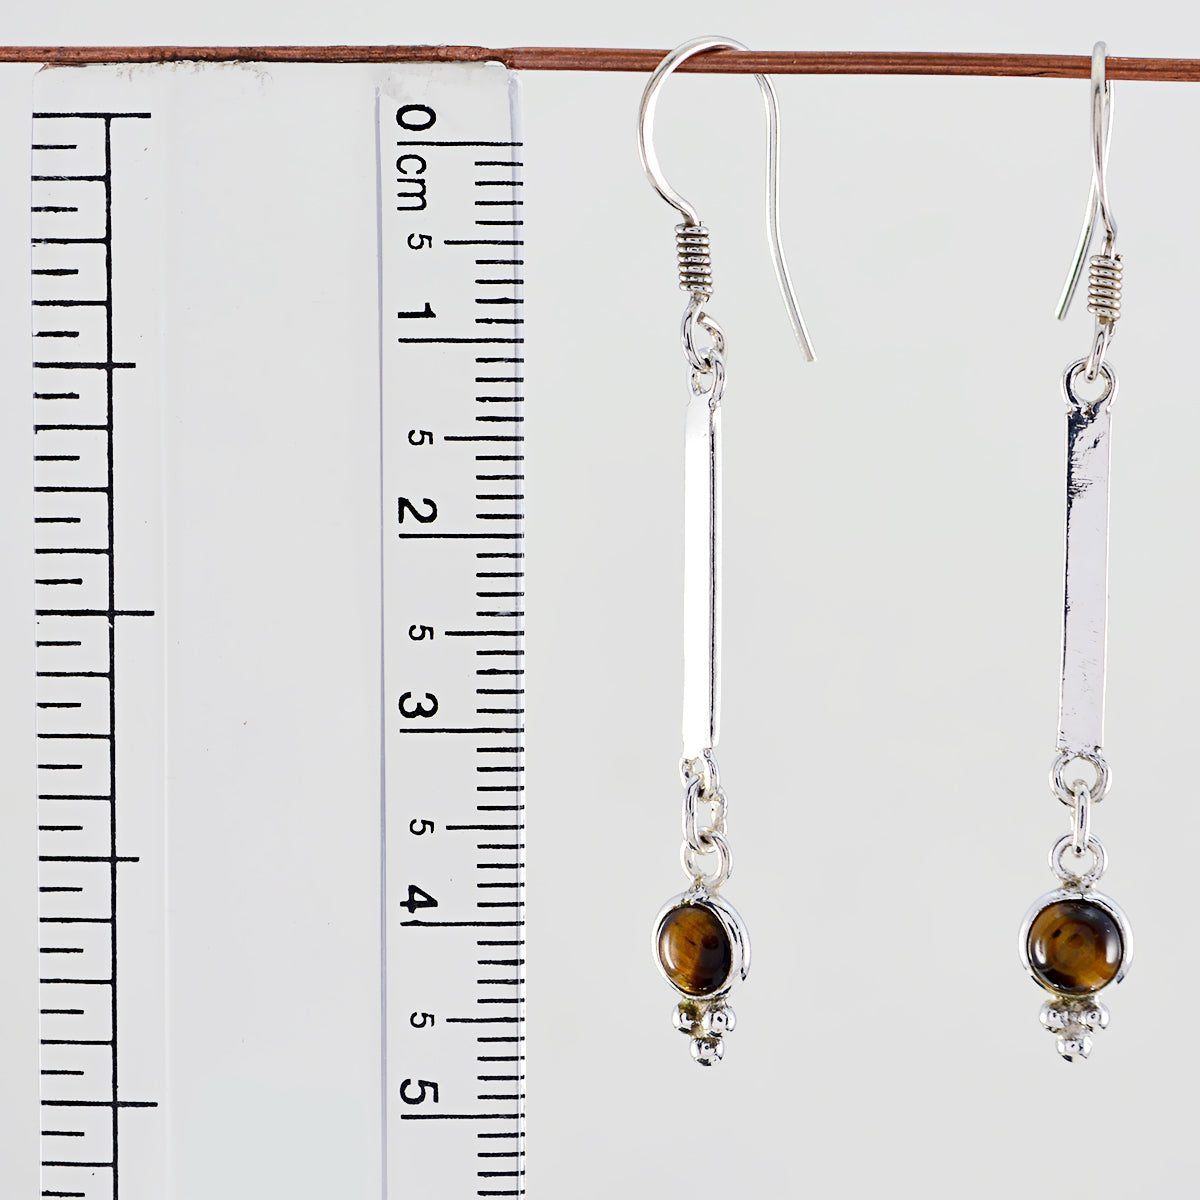 Riyo Nice Gemstone oval Cabochon Brown Tiger Eye Silver Earring gift for mother